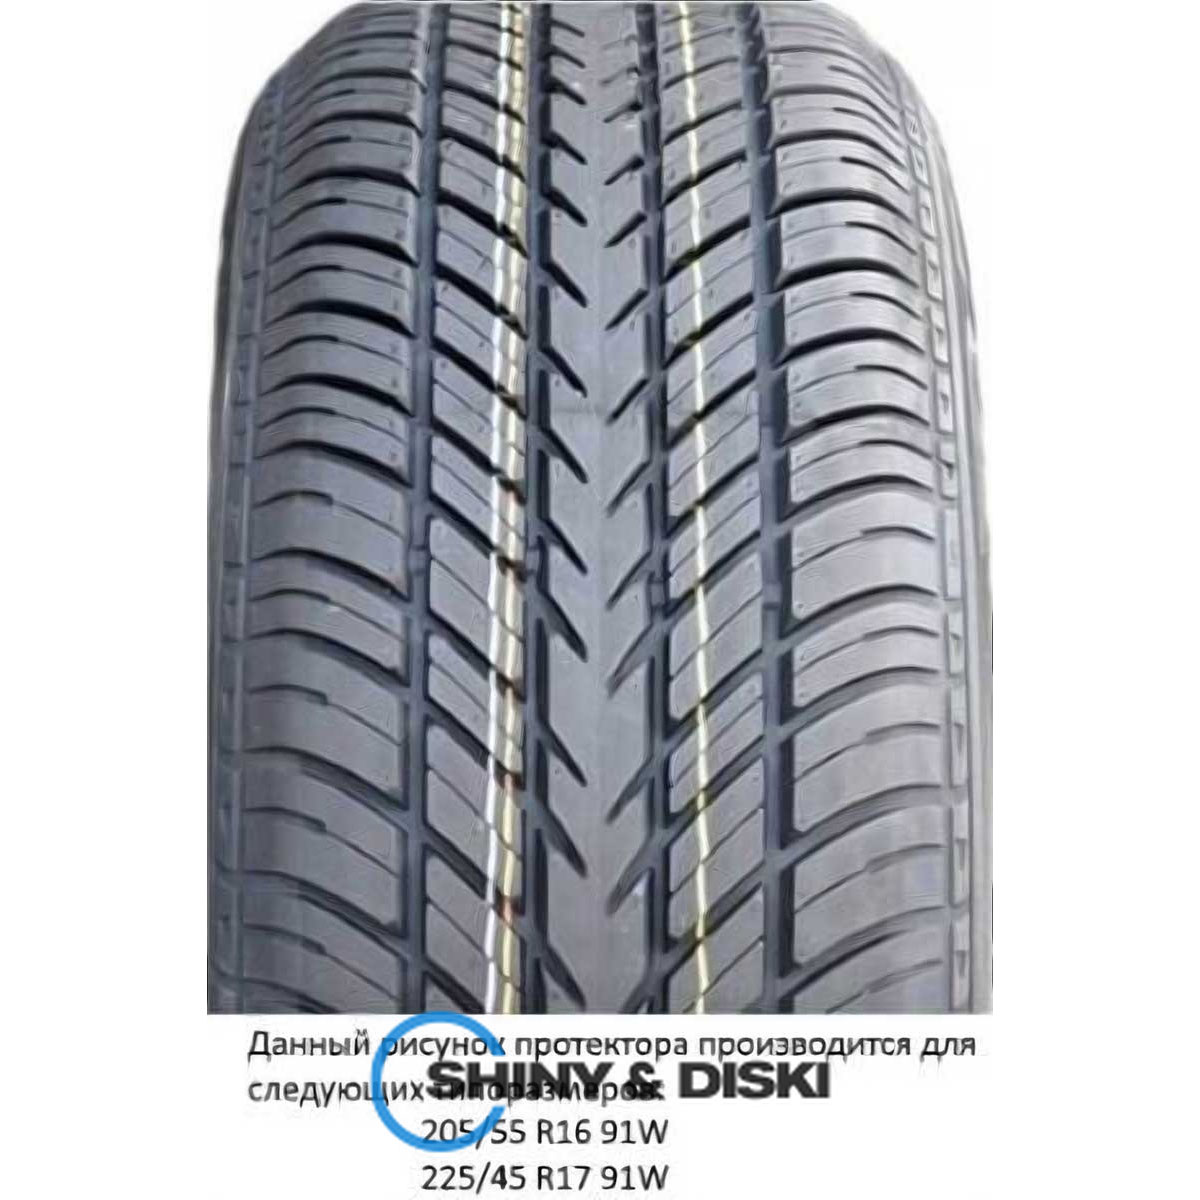 покрышки kelly uhp 225/45 r17 91w fp